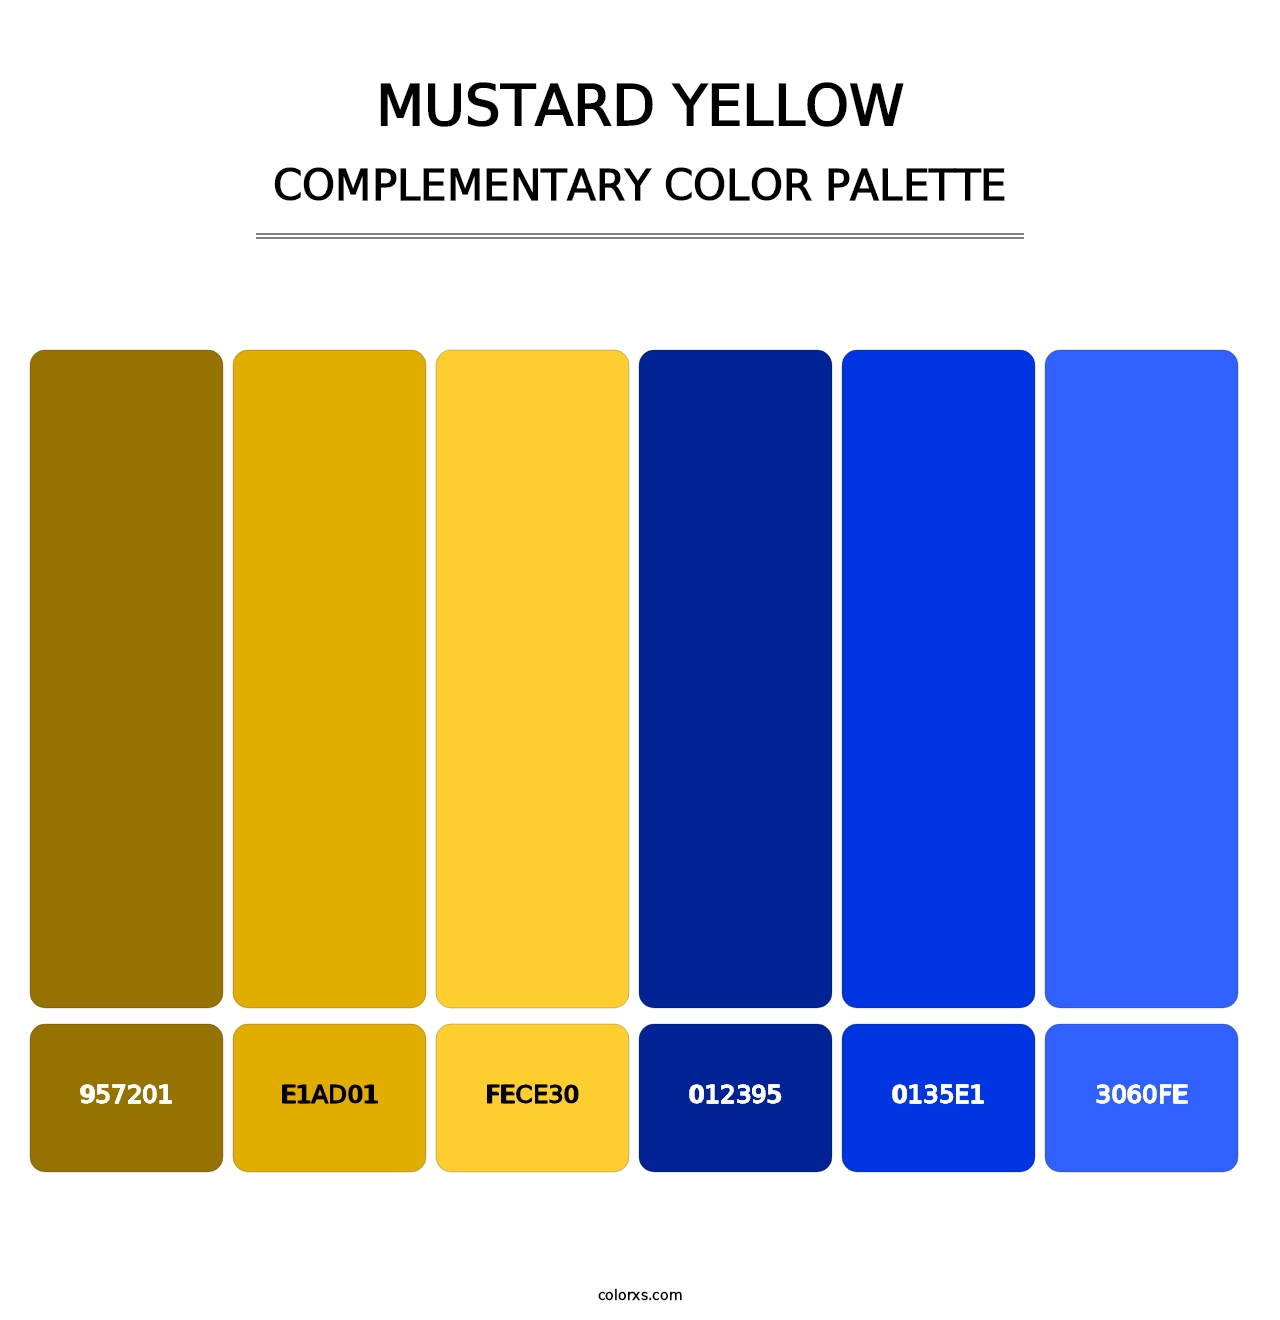 Mustard Yellow - Complementary Color Palette